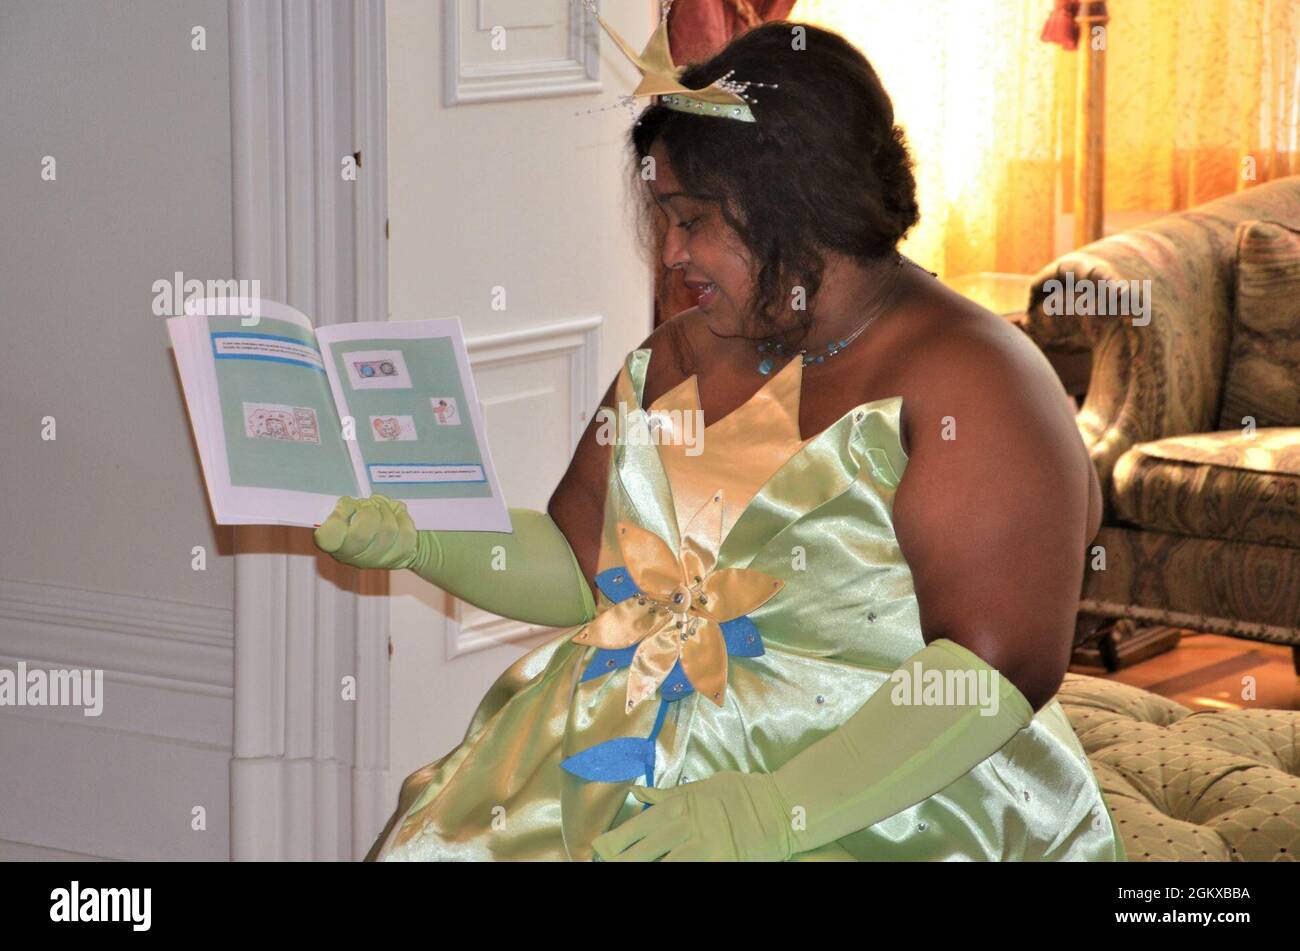 Princess Tiana (Alexis Boeh-Peterson), spins some magic with a story to her group of princes and princesses during the “Storytime with Princesses” event held at Rock Island Arsenal, Illinois, July 17. Stock Photo